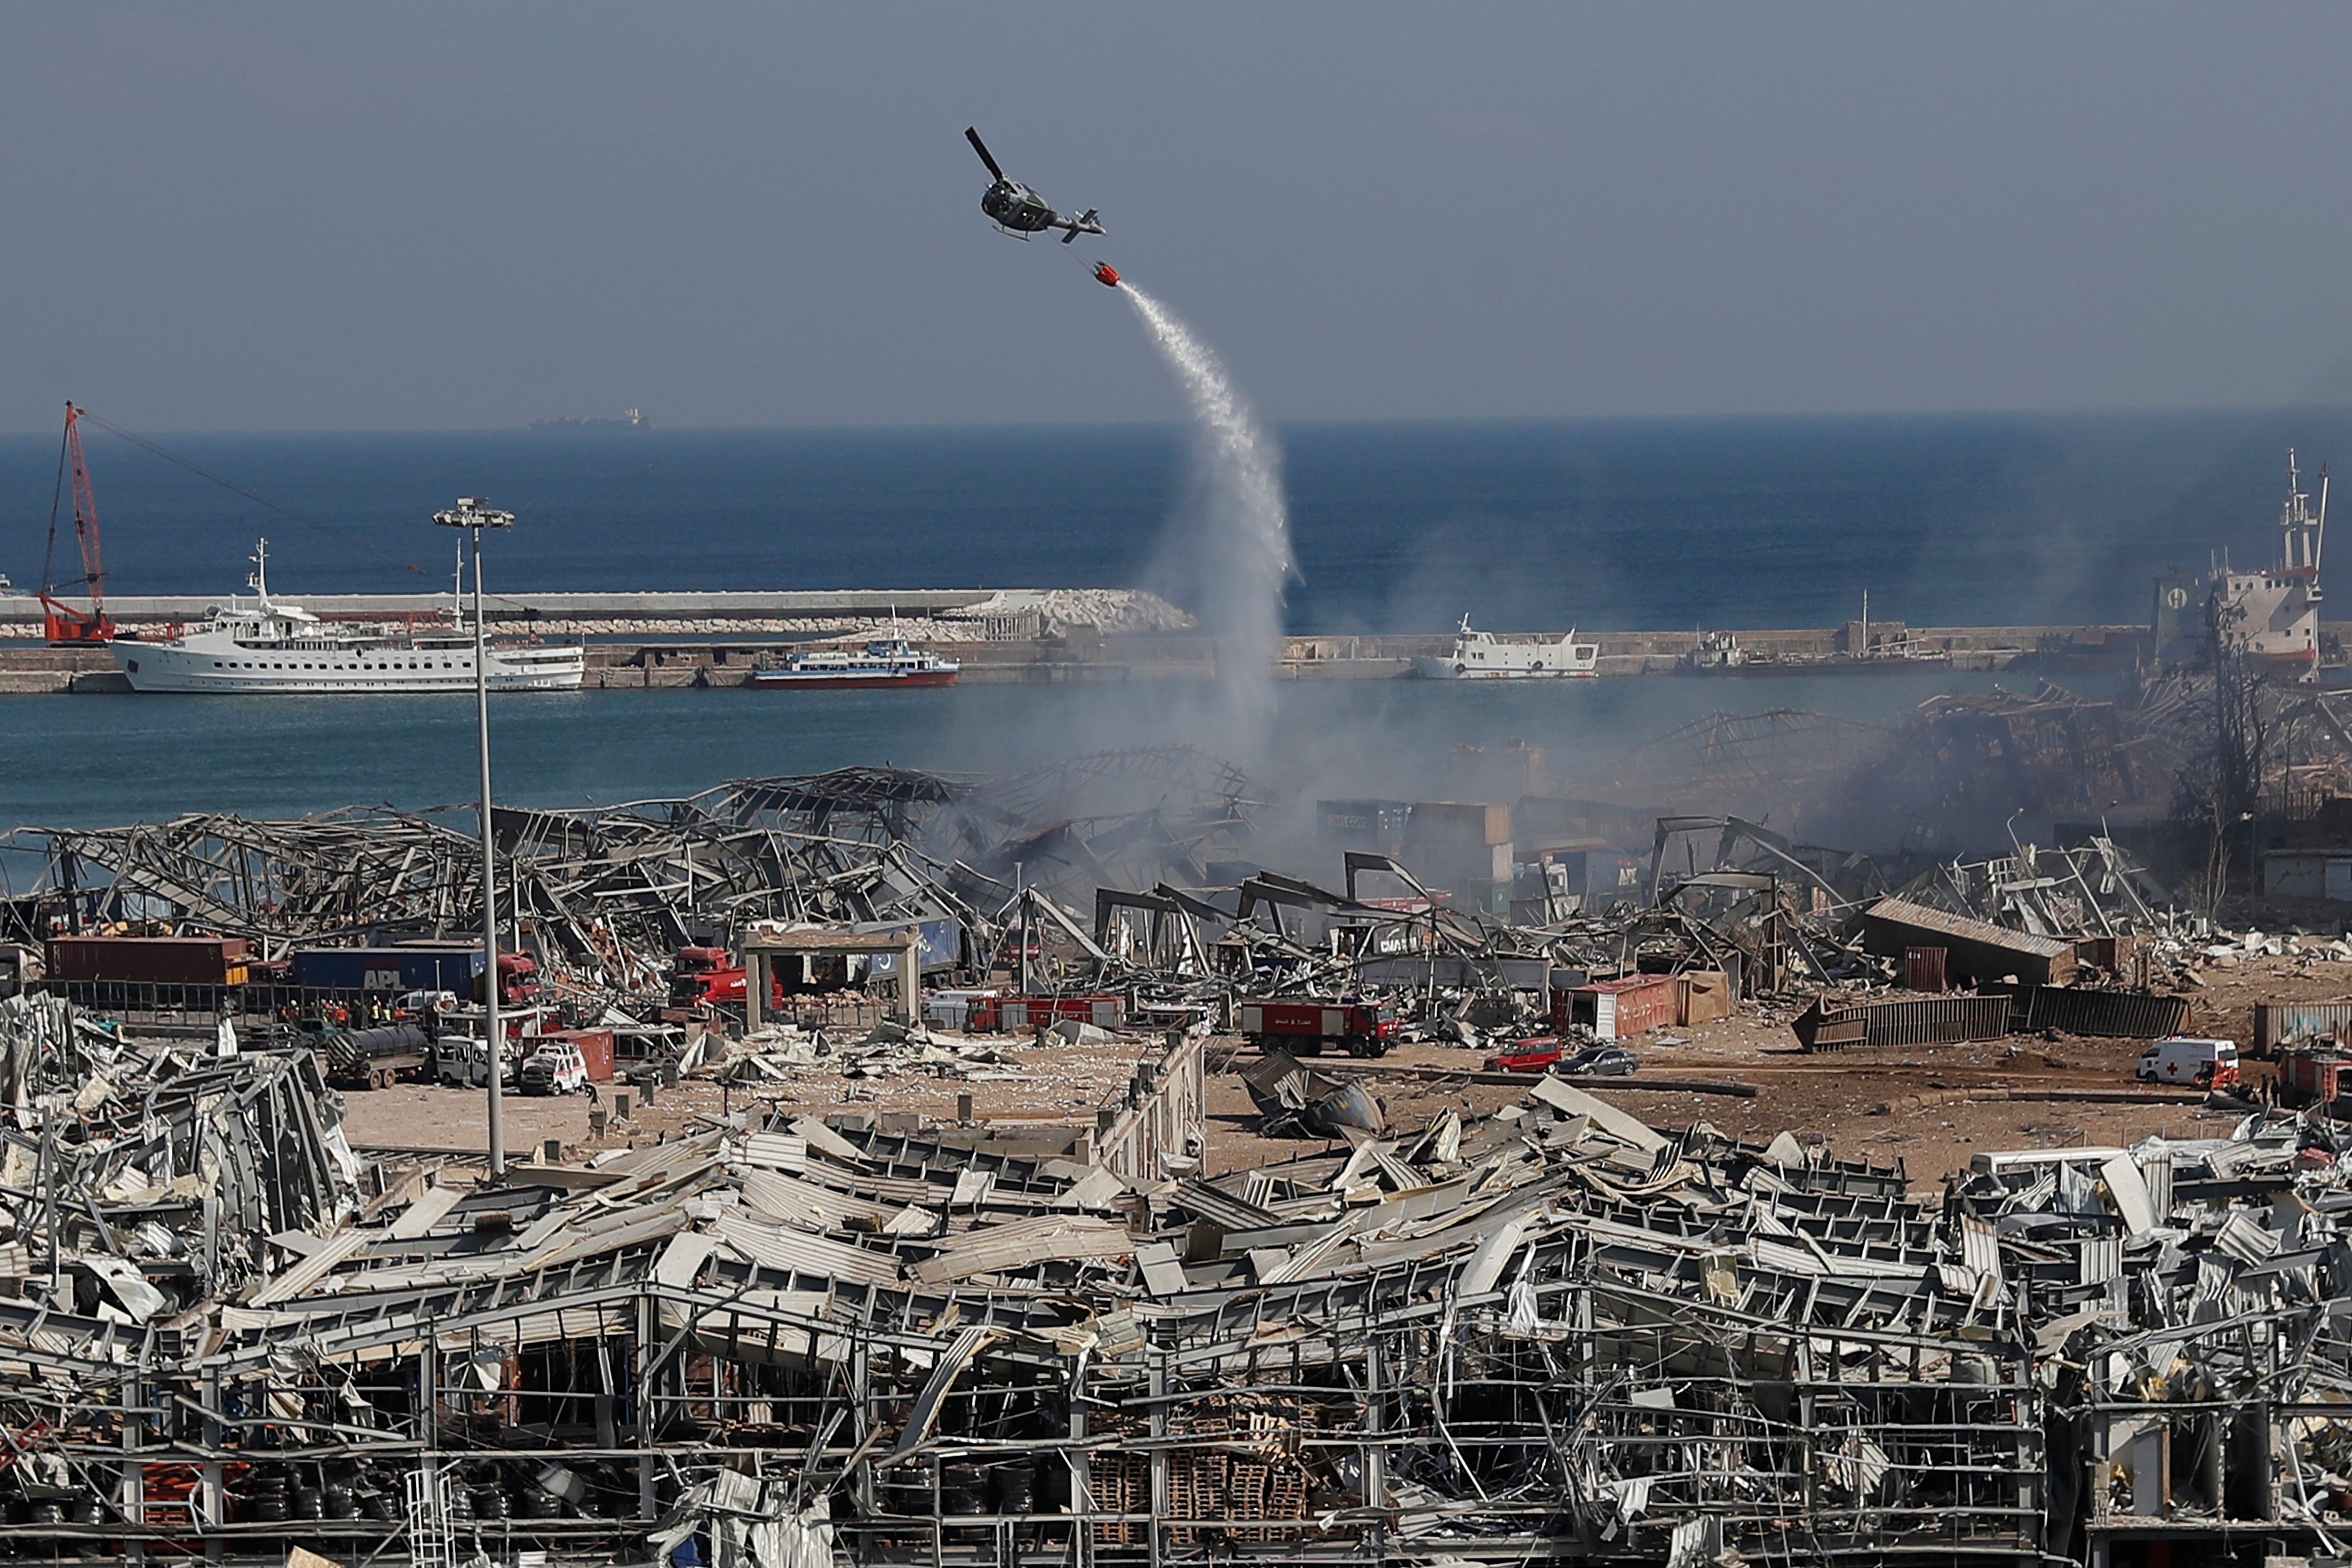 An army helicopter drops water at the scene of Tuesday's massive explosion that hit the seaport of Beirut, Lebanon, Wednesday, Aug. 5, 2020. Residents of Beirut awoke to a scene of utter devastation on Wednesday, a day after a massive explosion at the port sent shock waves across the Lebanese capital, killing dozens of people and wounding thousands.